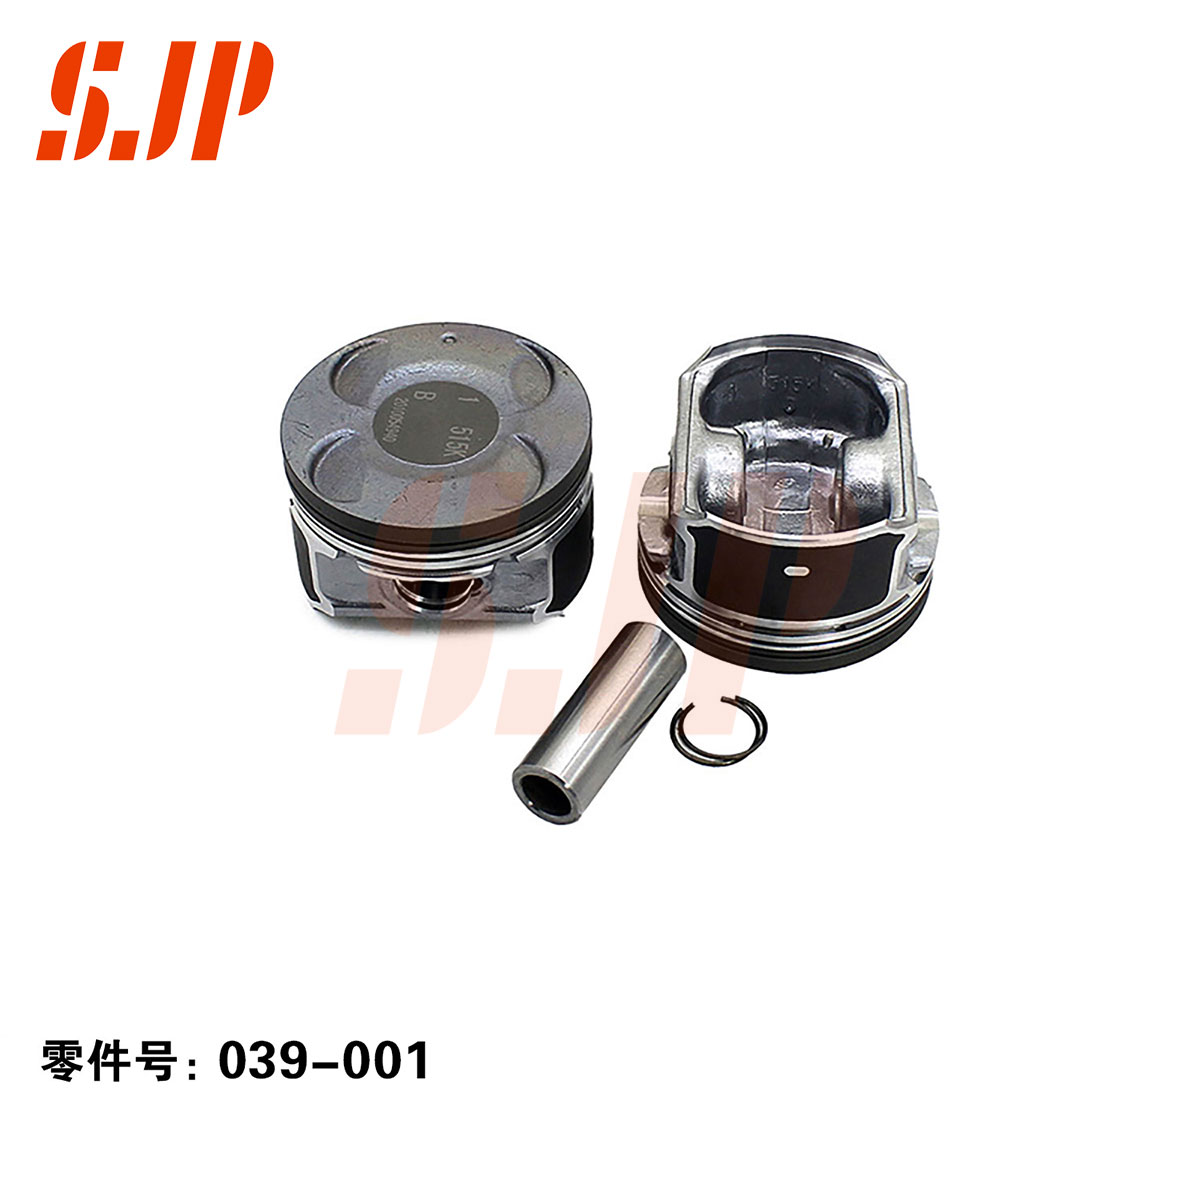 SJ-039-001 Piston And Pin For 515KR